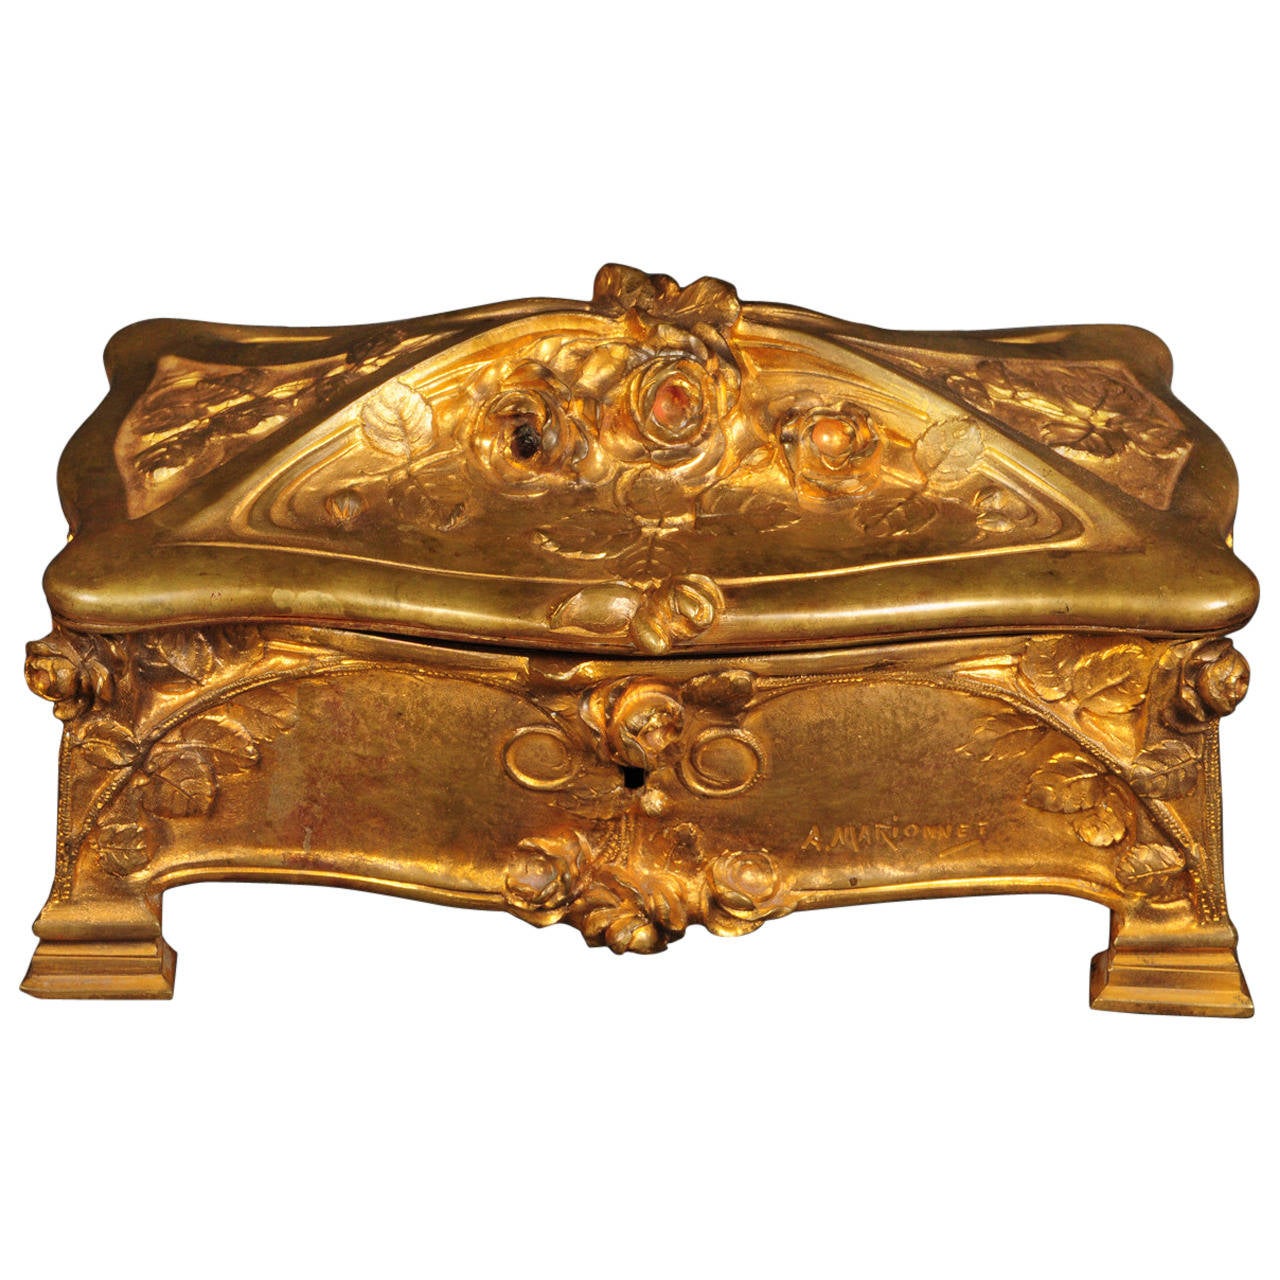 A French Gilt Bronze Jewelry Casket with Red Interior